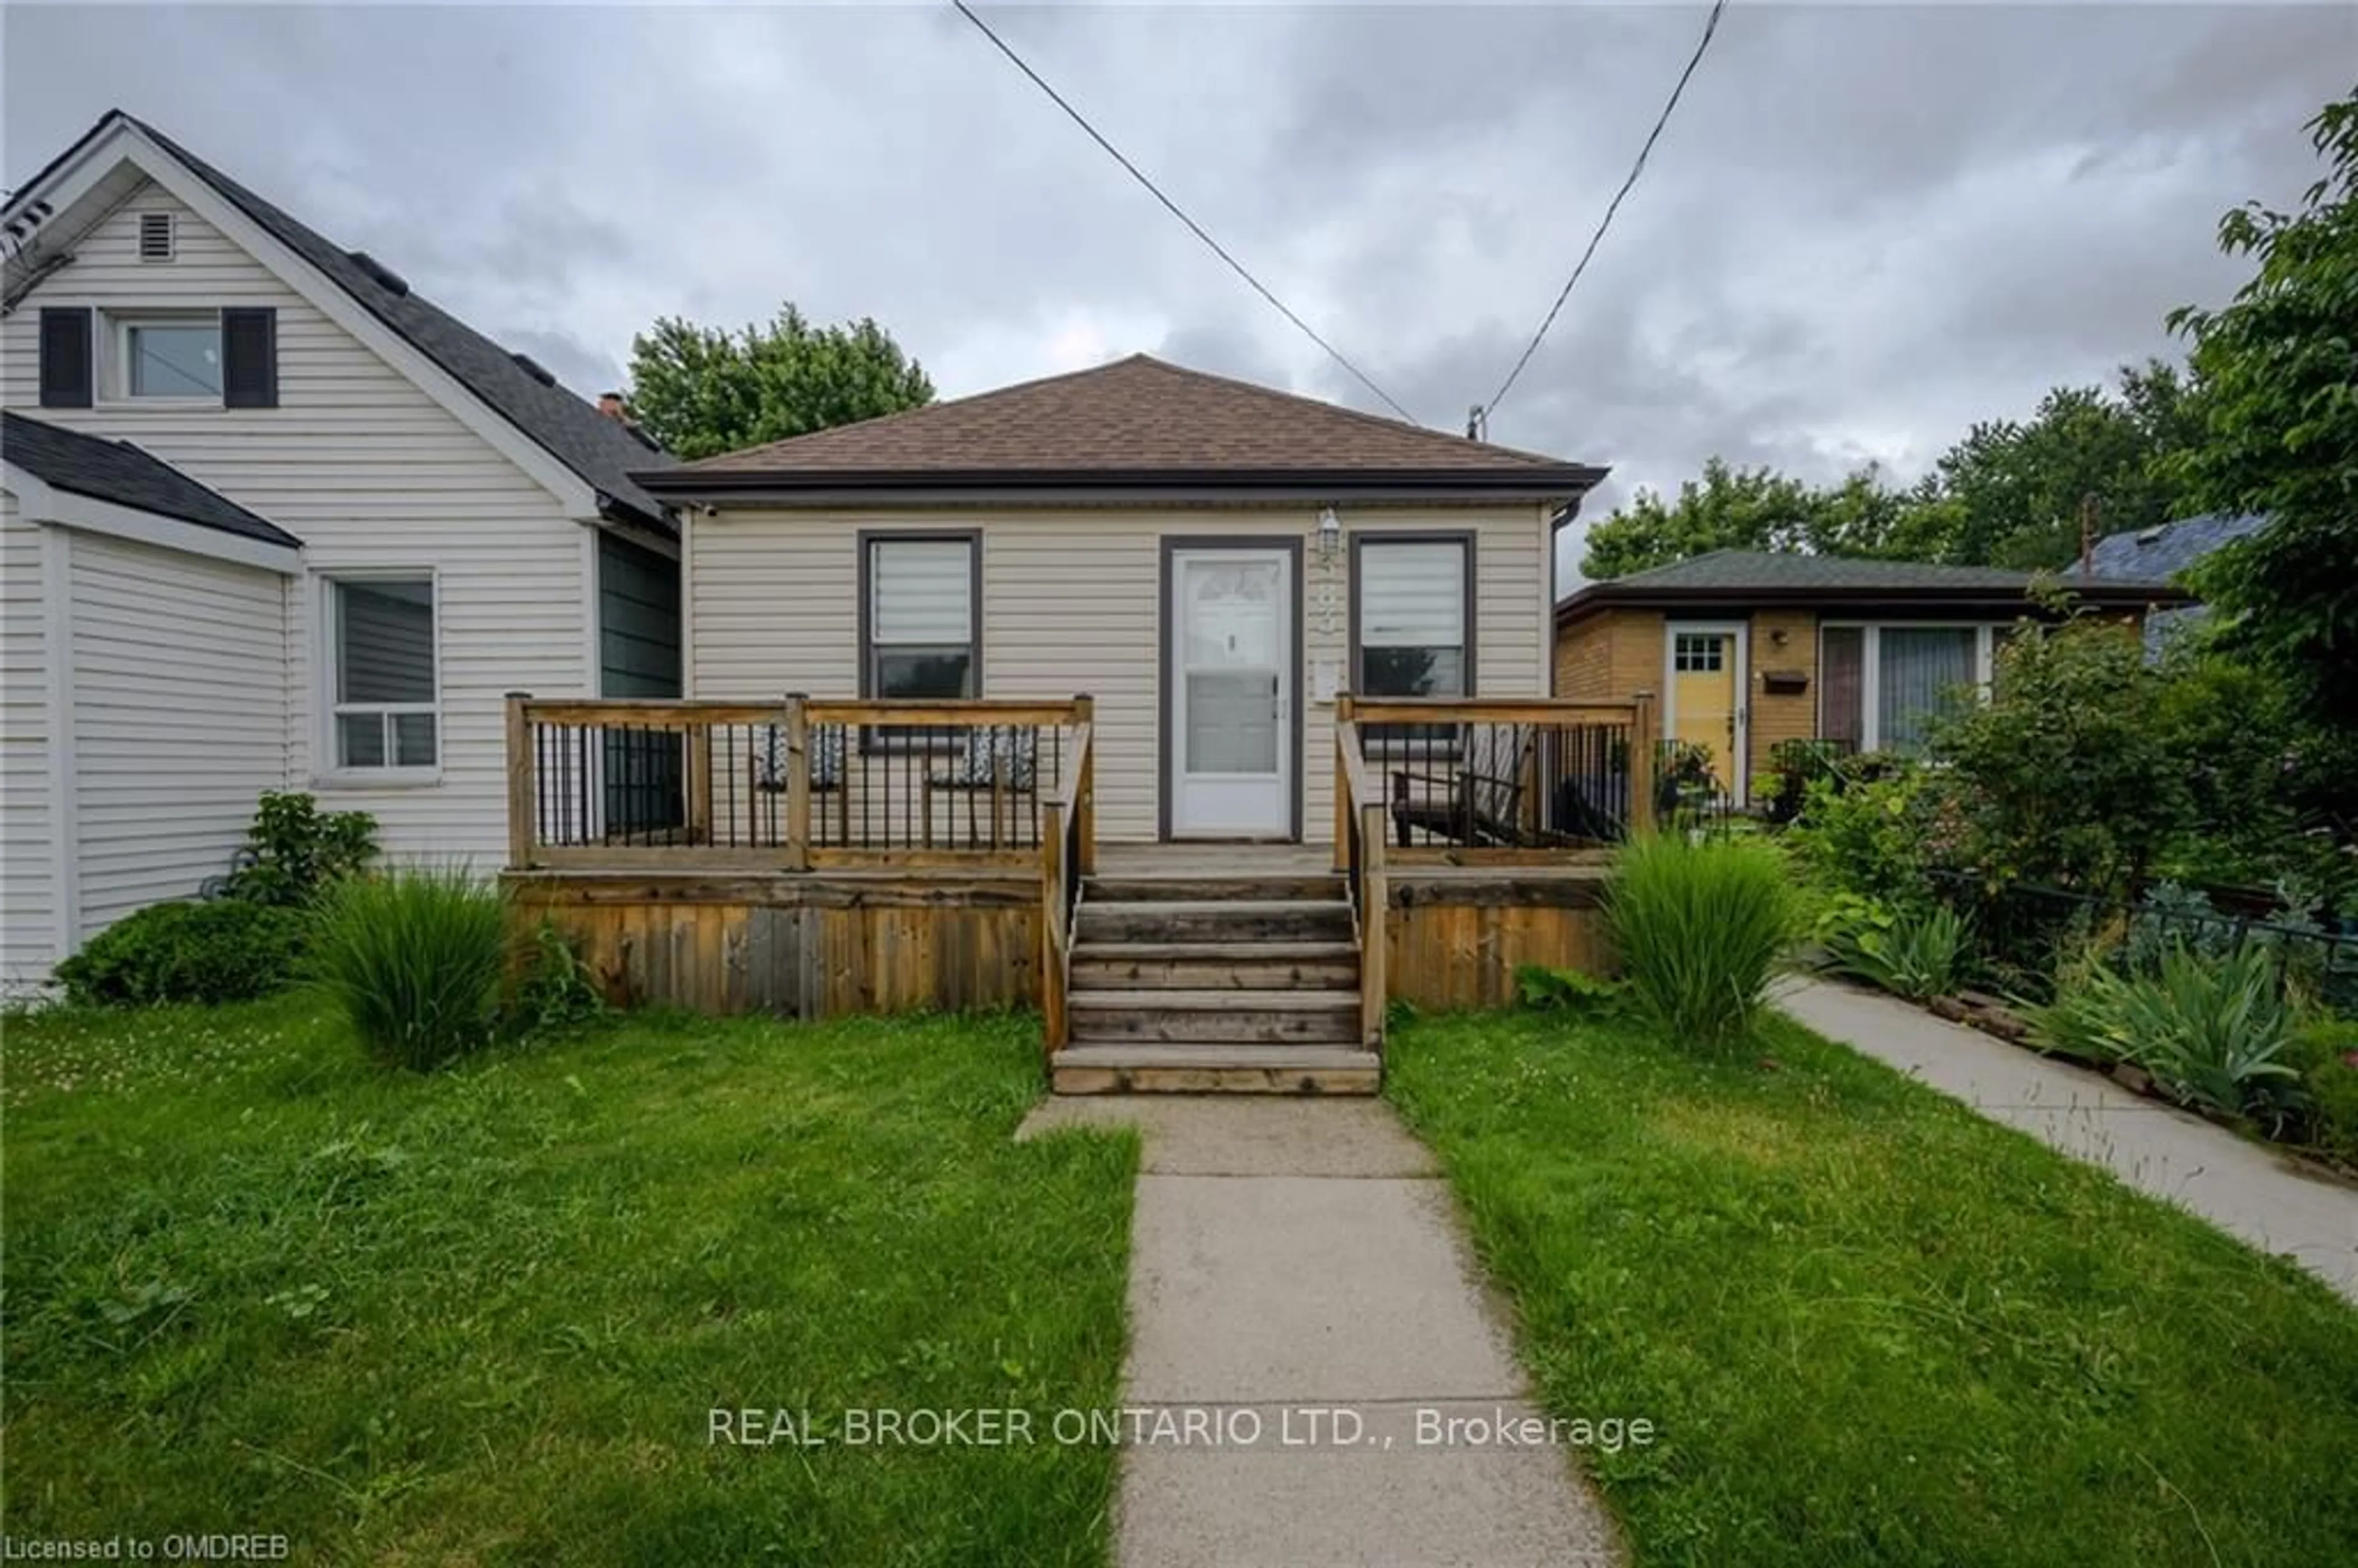 Frontside or backside of a home for 383 Cope St, Hamilton Ontario L8H 5C2